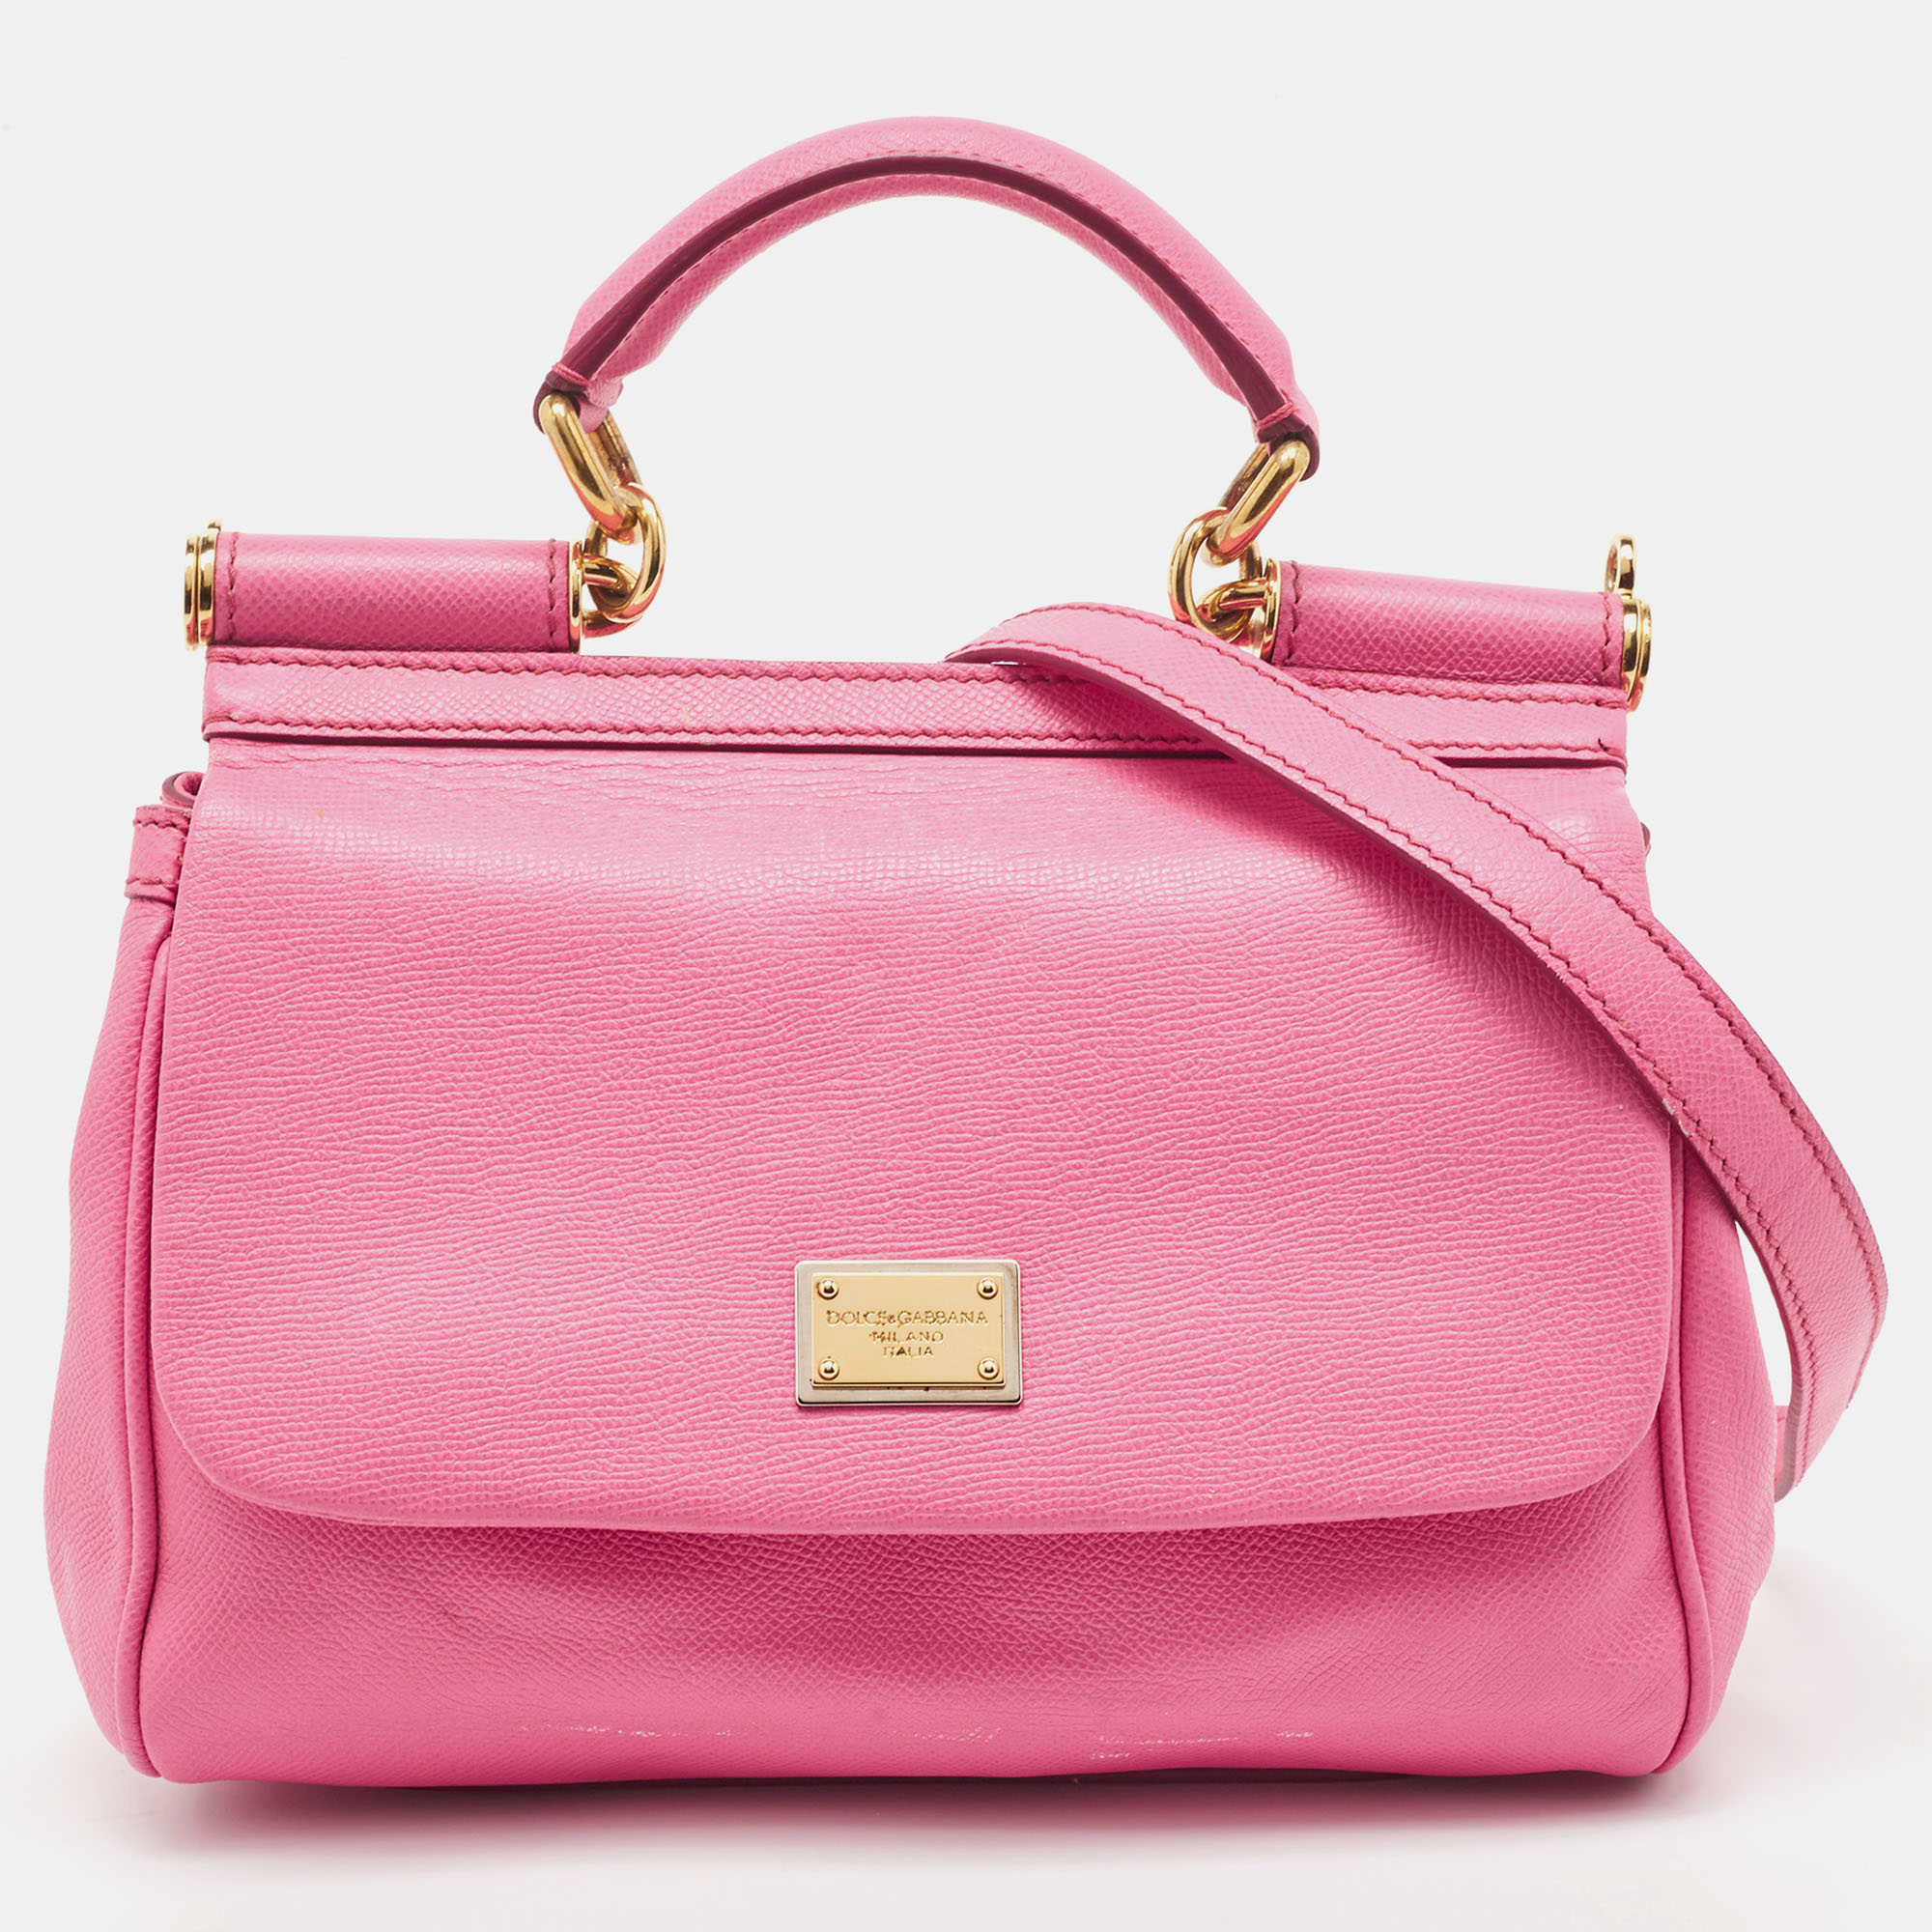 Pre-owned Dolce & Gabbana Pink Leather Medium Miss Sicily Top Handle Bag